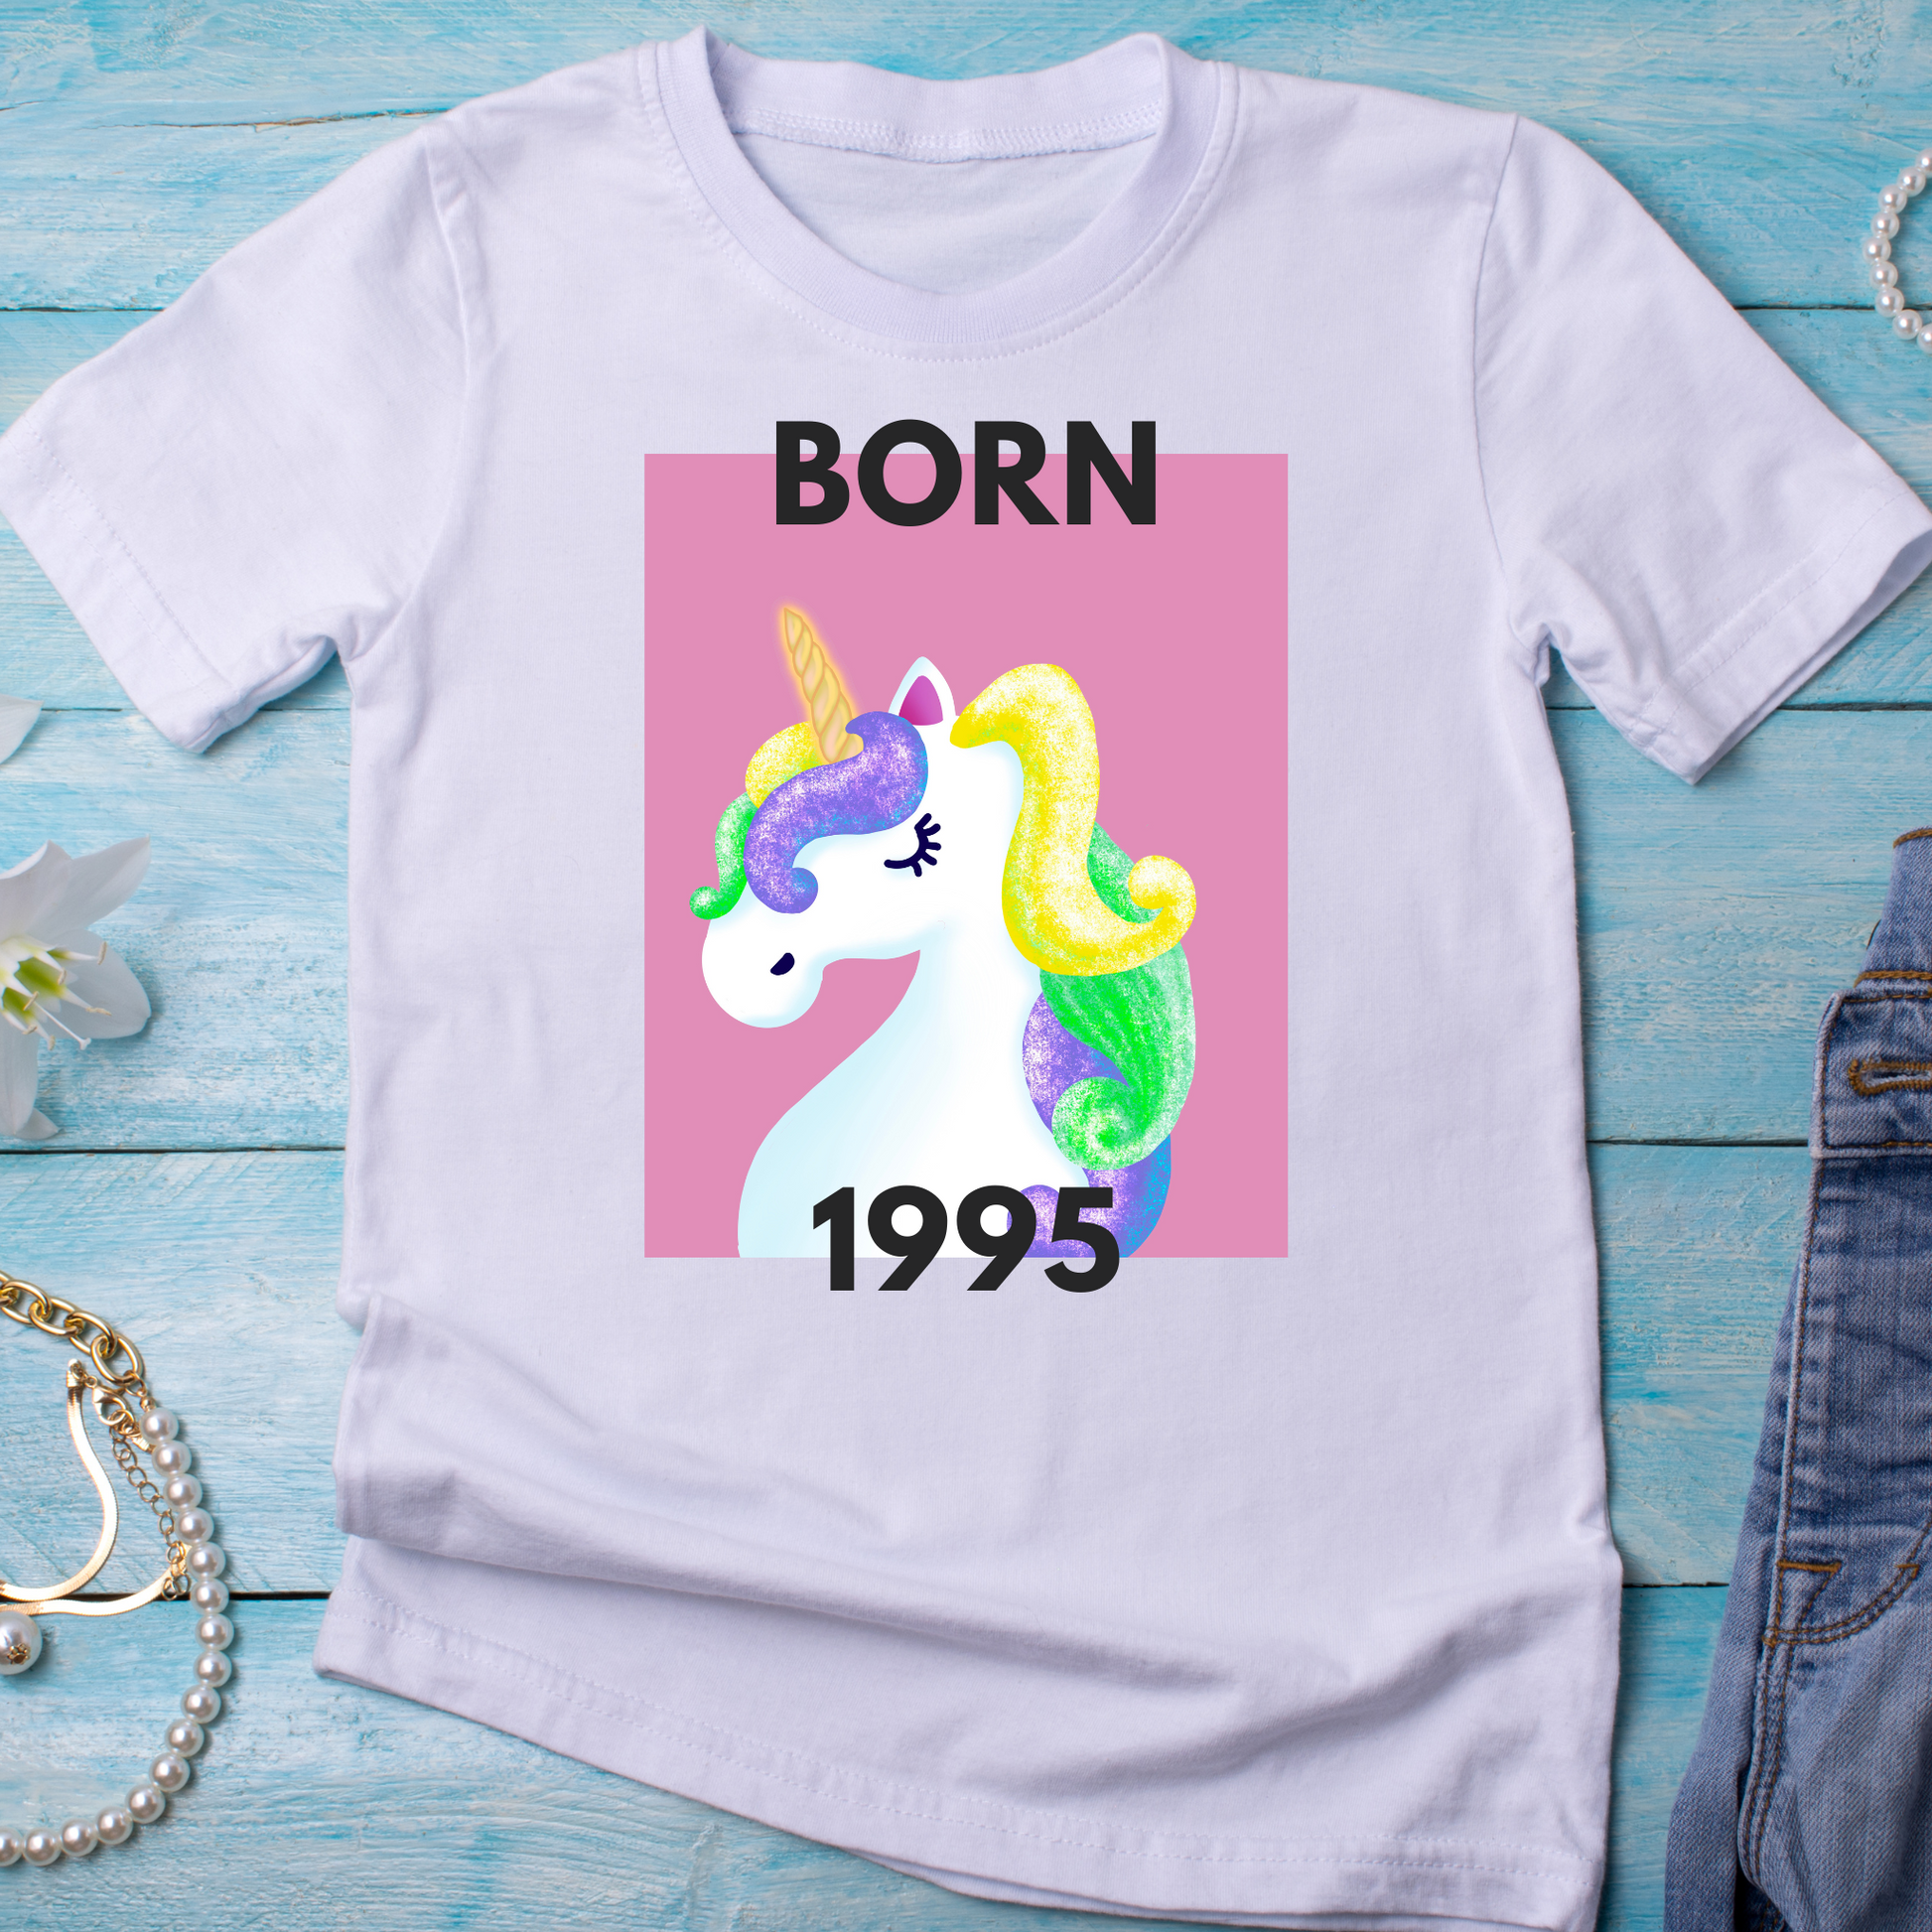 Born in 1995 awesome women's tee - 90s vintage t-shirt - Premium t-shirt from Lees Krazy Teez - Just $19.95! Shop now at Lees Krazy Teez